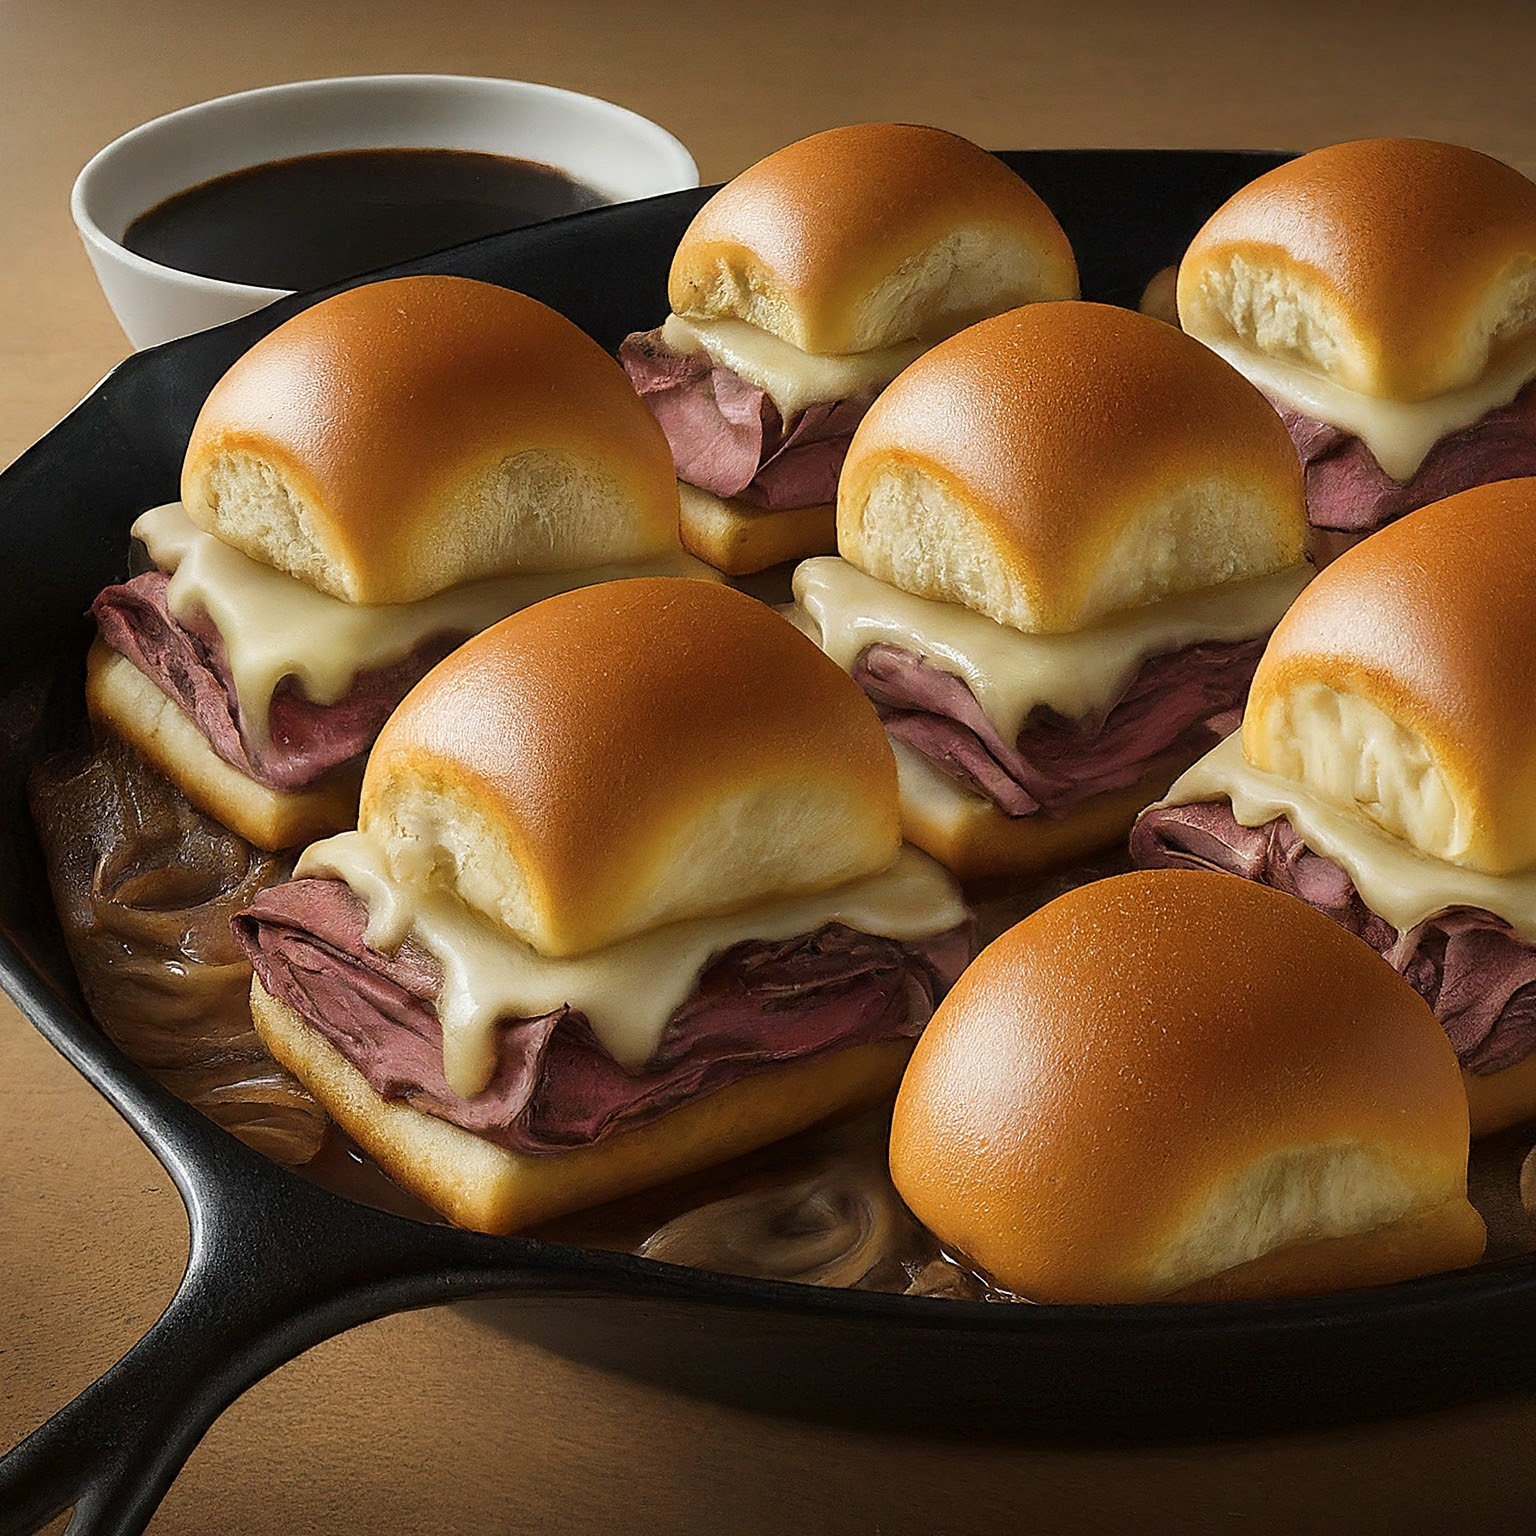 french dip sliders recipe: Delicious dominance!